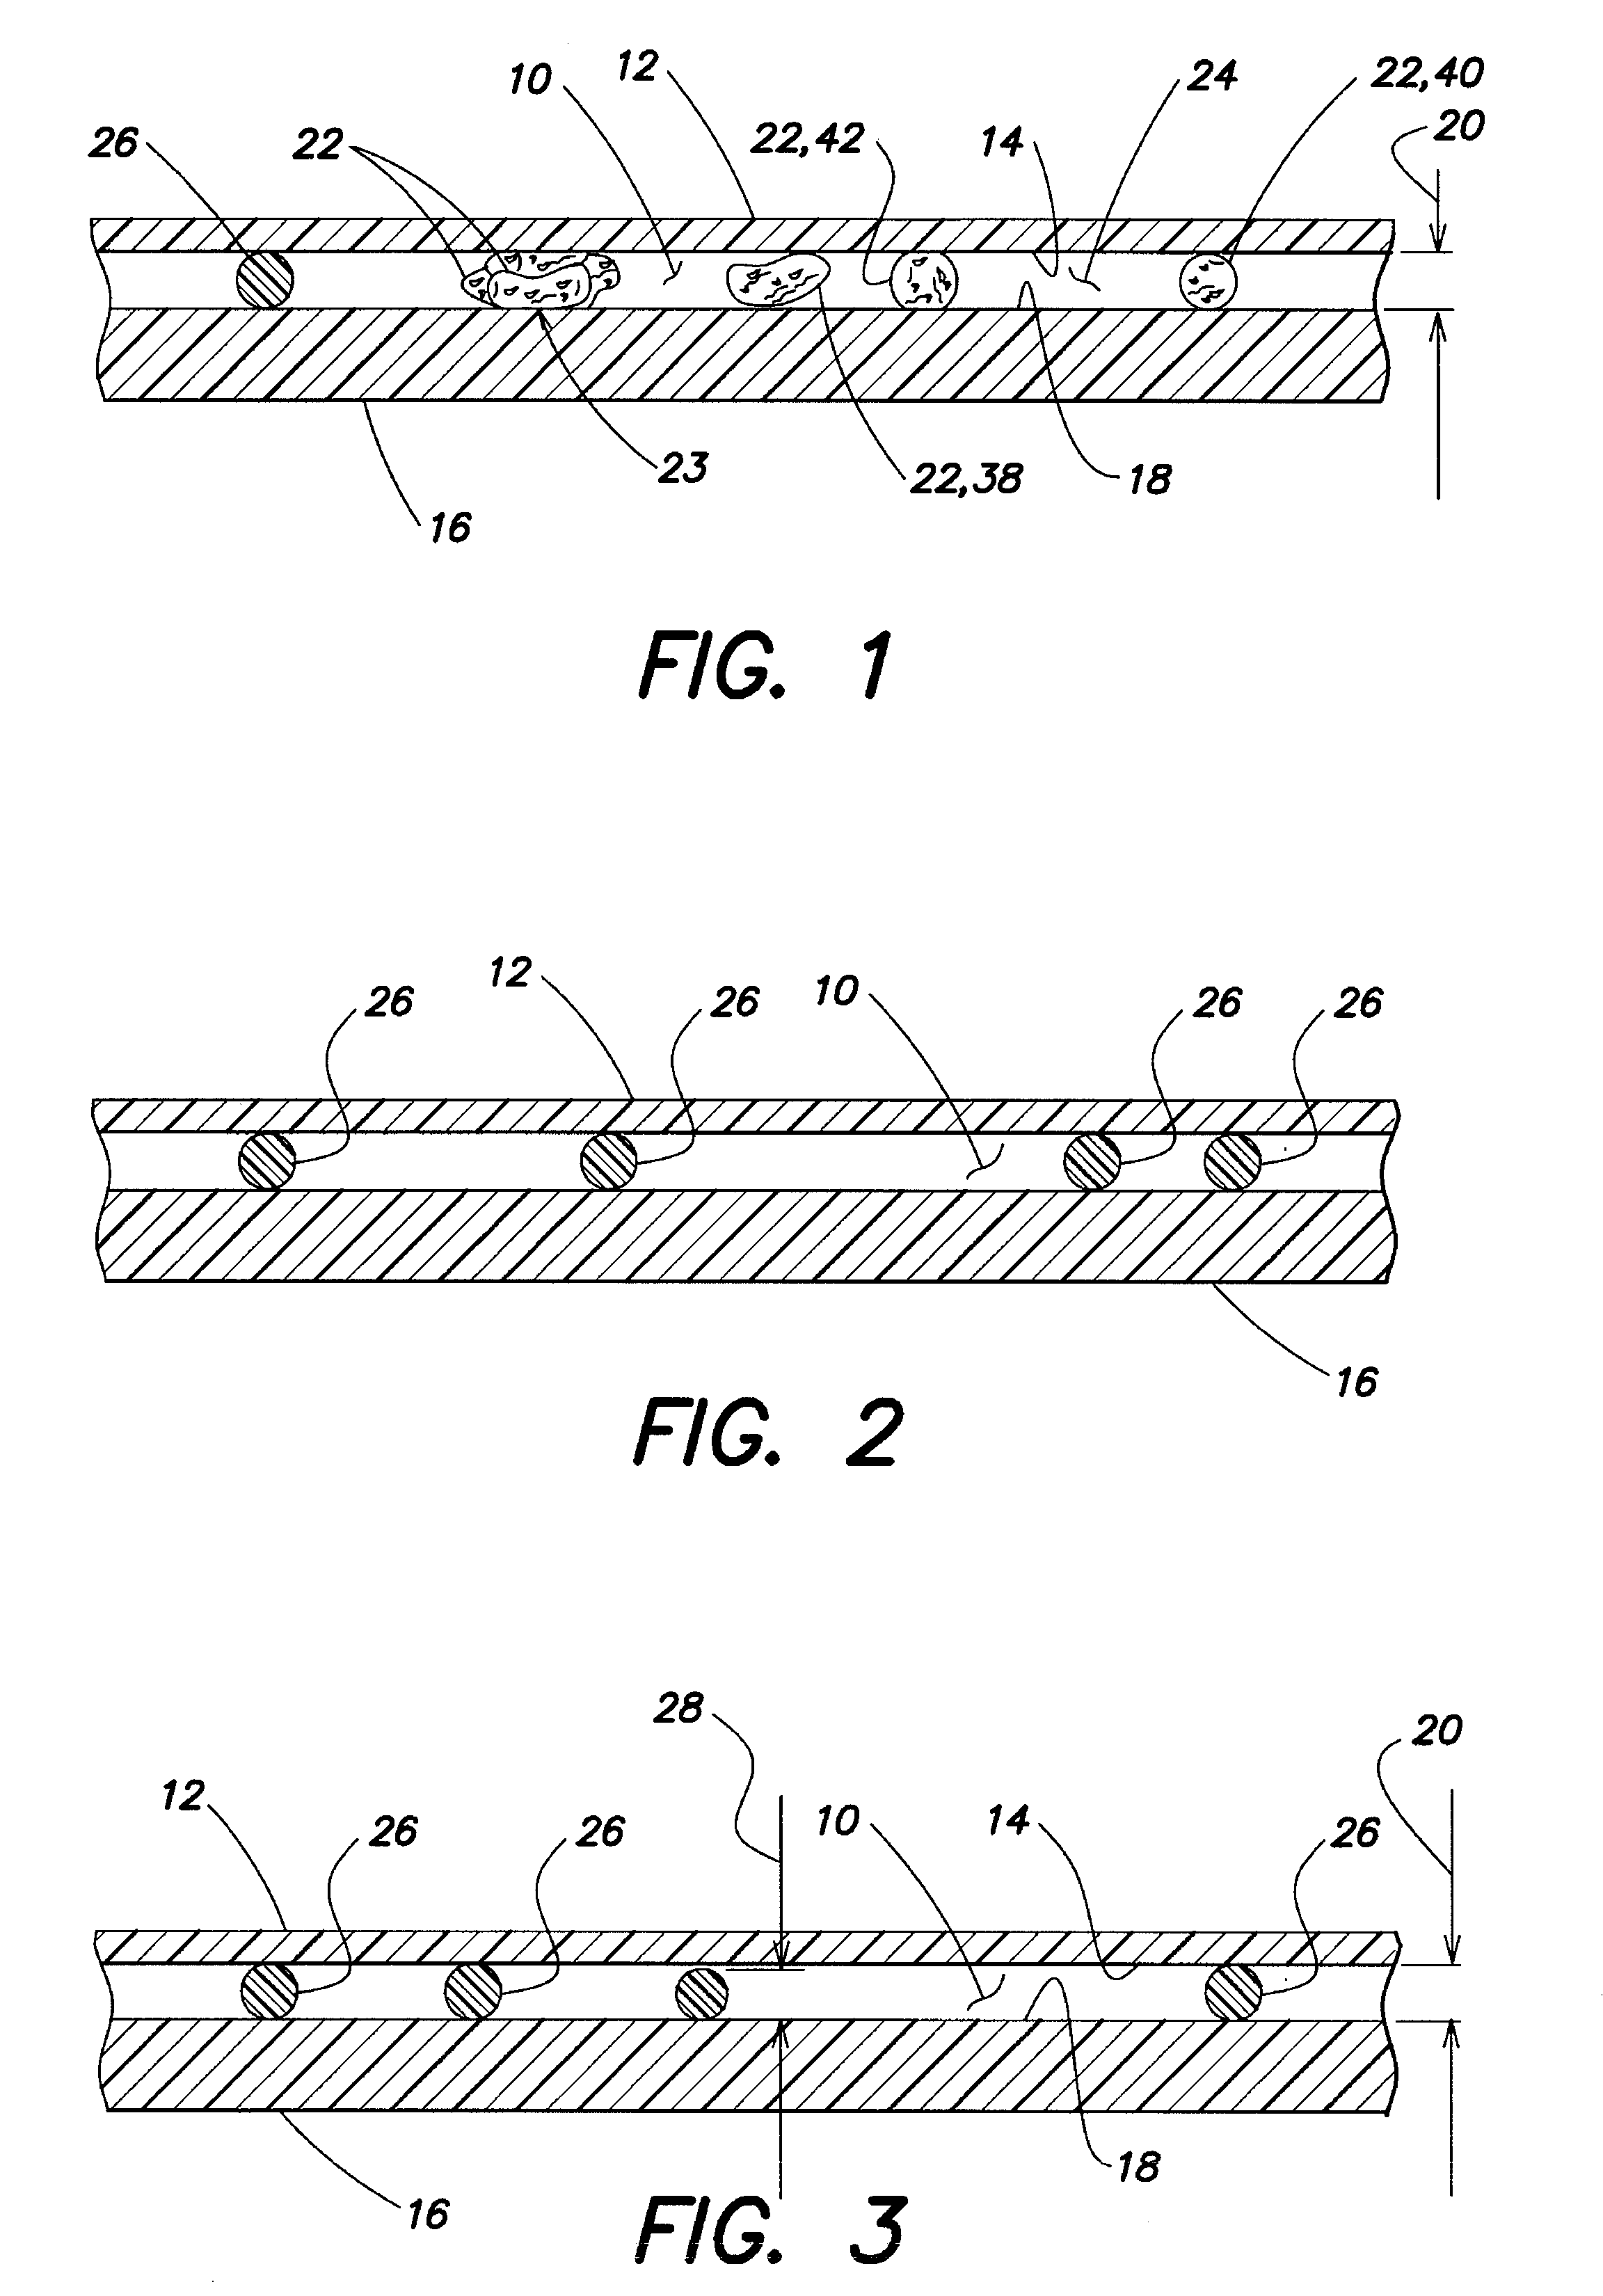 Method and apparatus for determining the hematocrit of a blood sample utilizing the intrinsic pigmentation of hemoglobin contained within the red blood cells